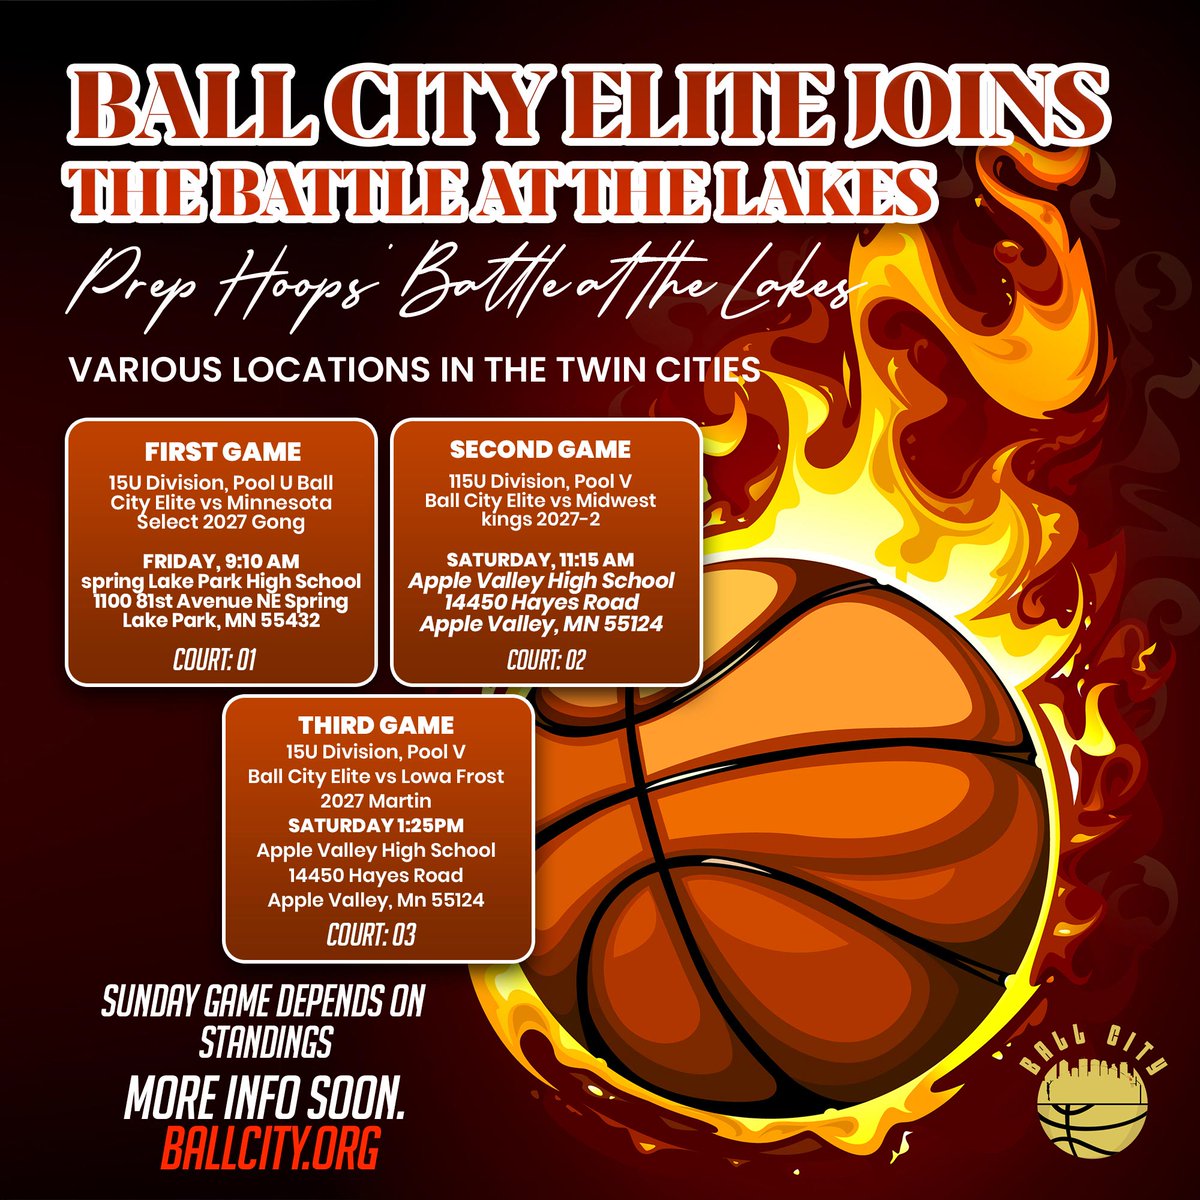 Ball City Elite's schedule for the @thephcircuit's Battle at the Lakes 2024.
We look forward to seeing you! Let's go Ball City!!

#BallCity #BallCityNation #BallCityFamily #BiggerThanBasketball #teamworkmakesthedreamwork #allforoneoneforall #basketball #aaubasketball #aau